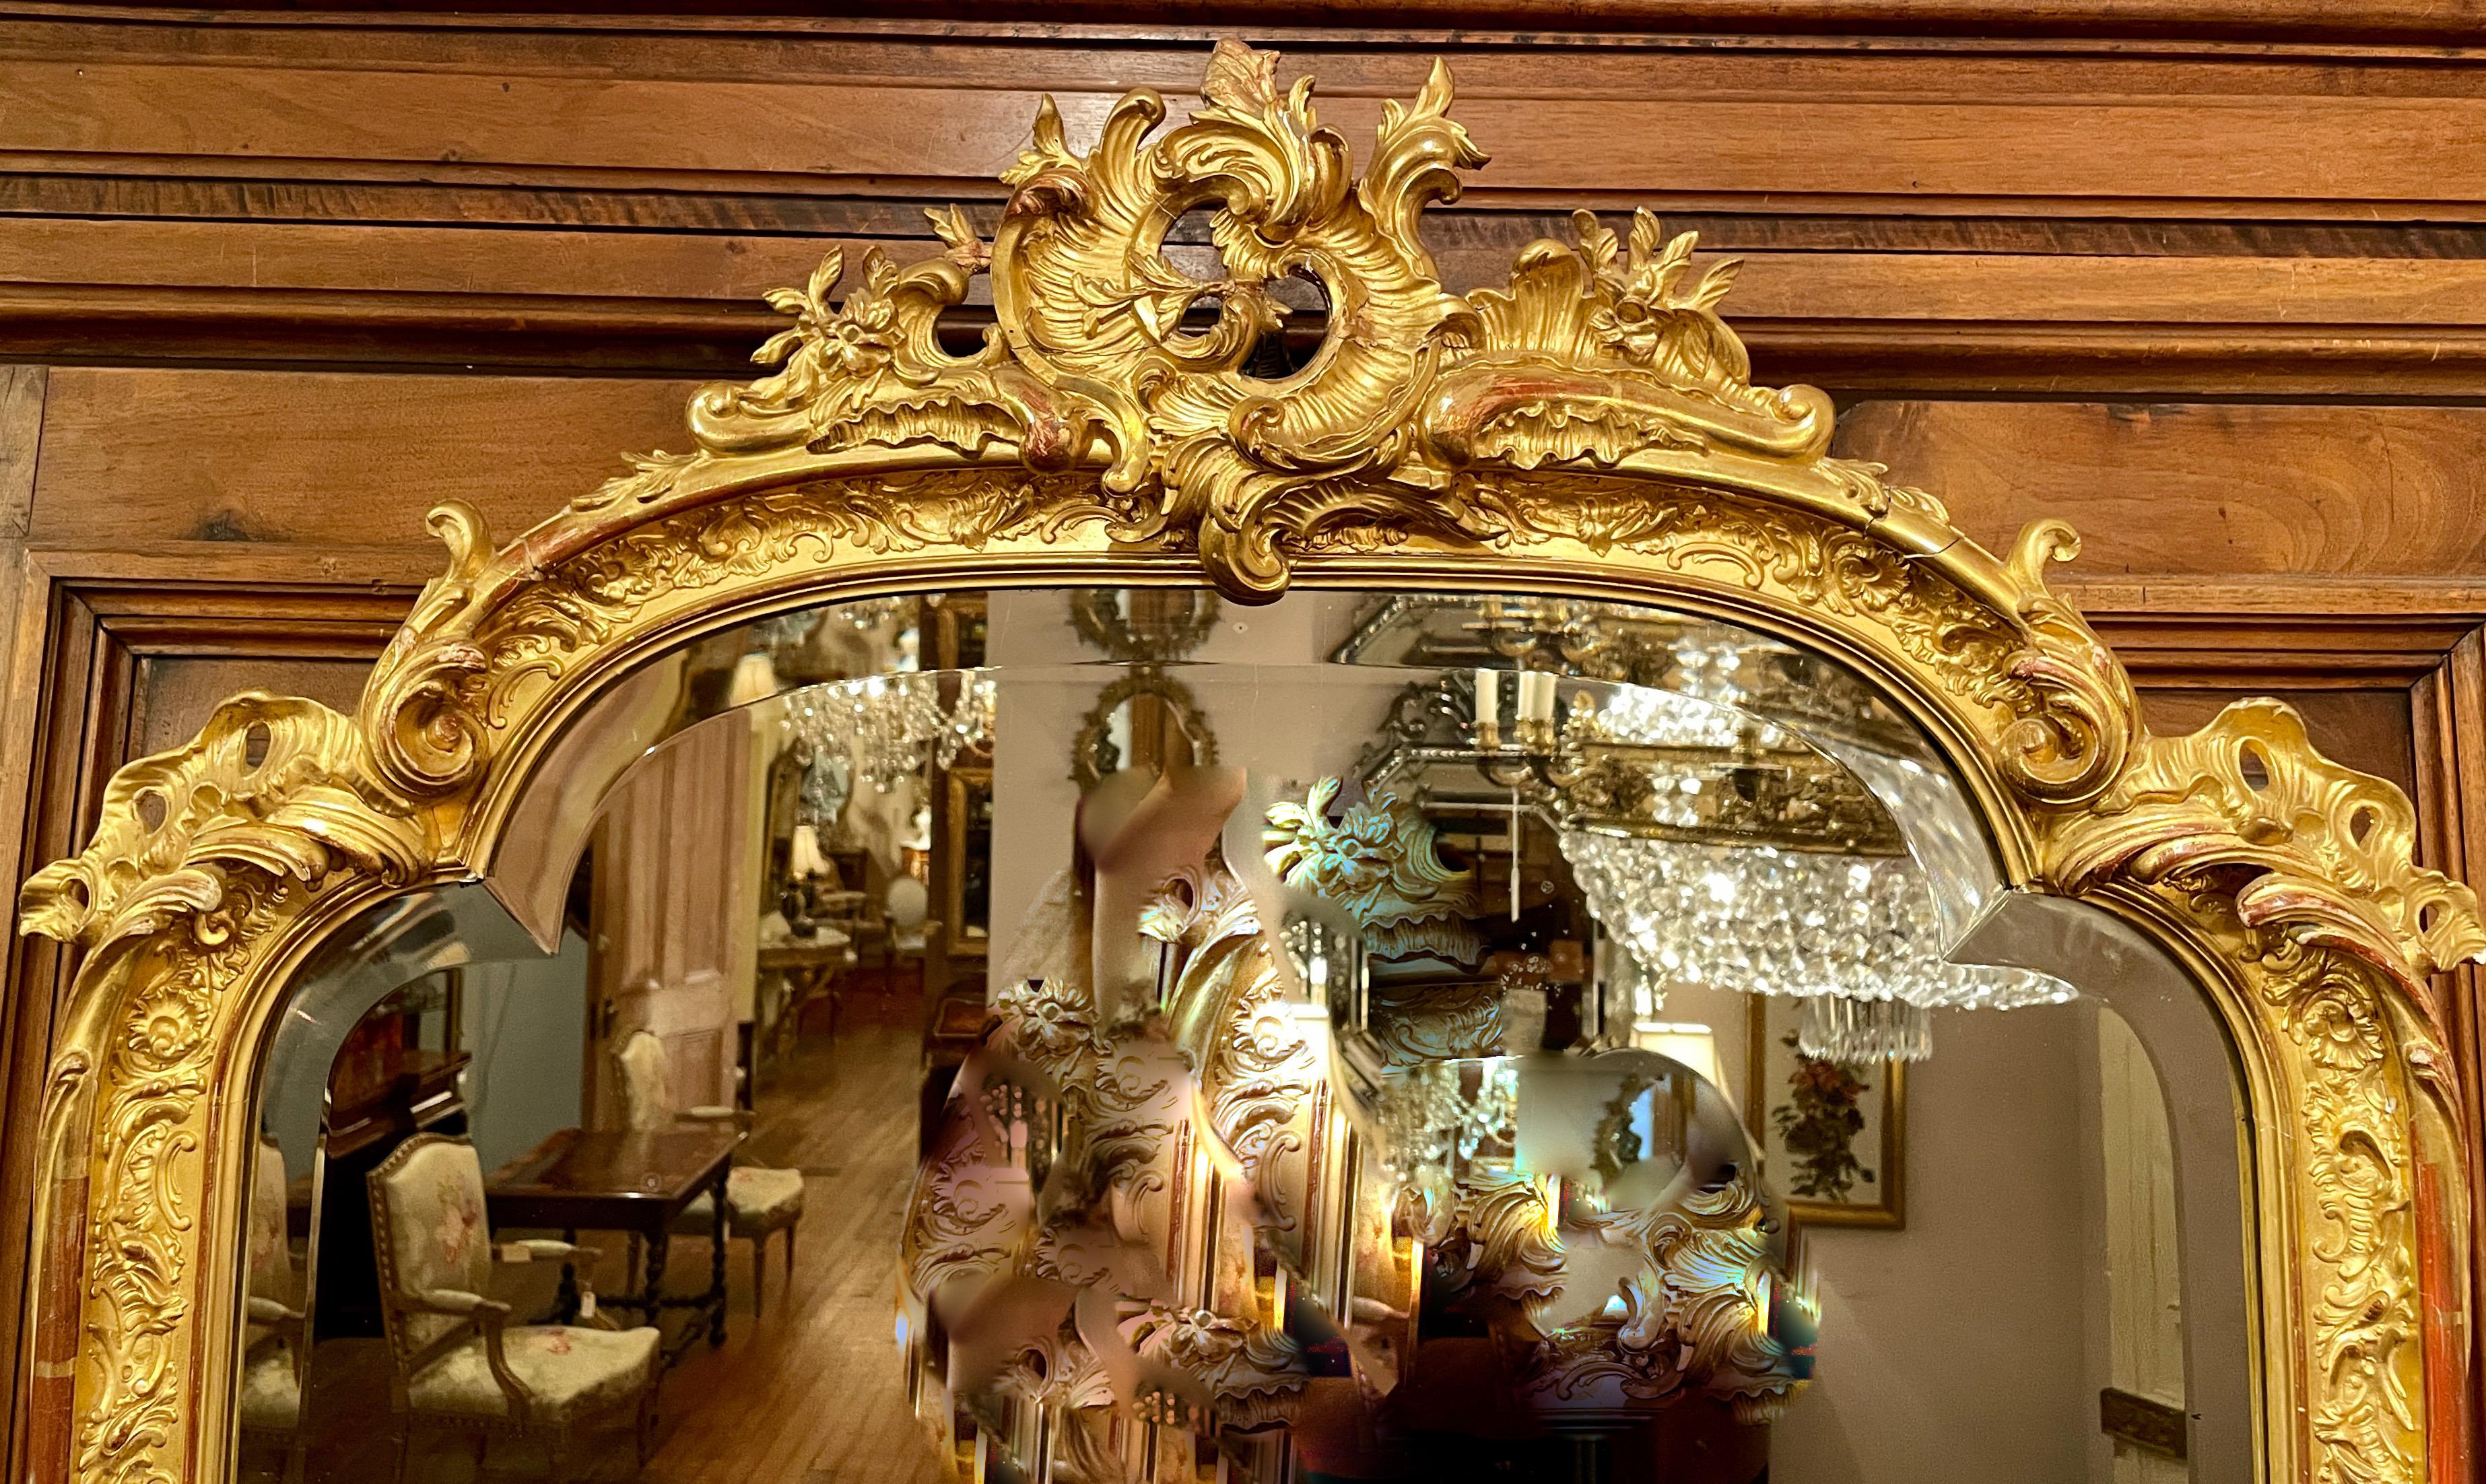 Antique French Napoleon III Gold Leaf mirror with beveling, Circa 1875-1885.